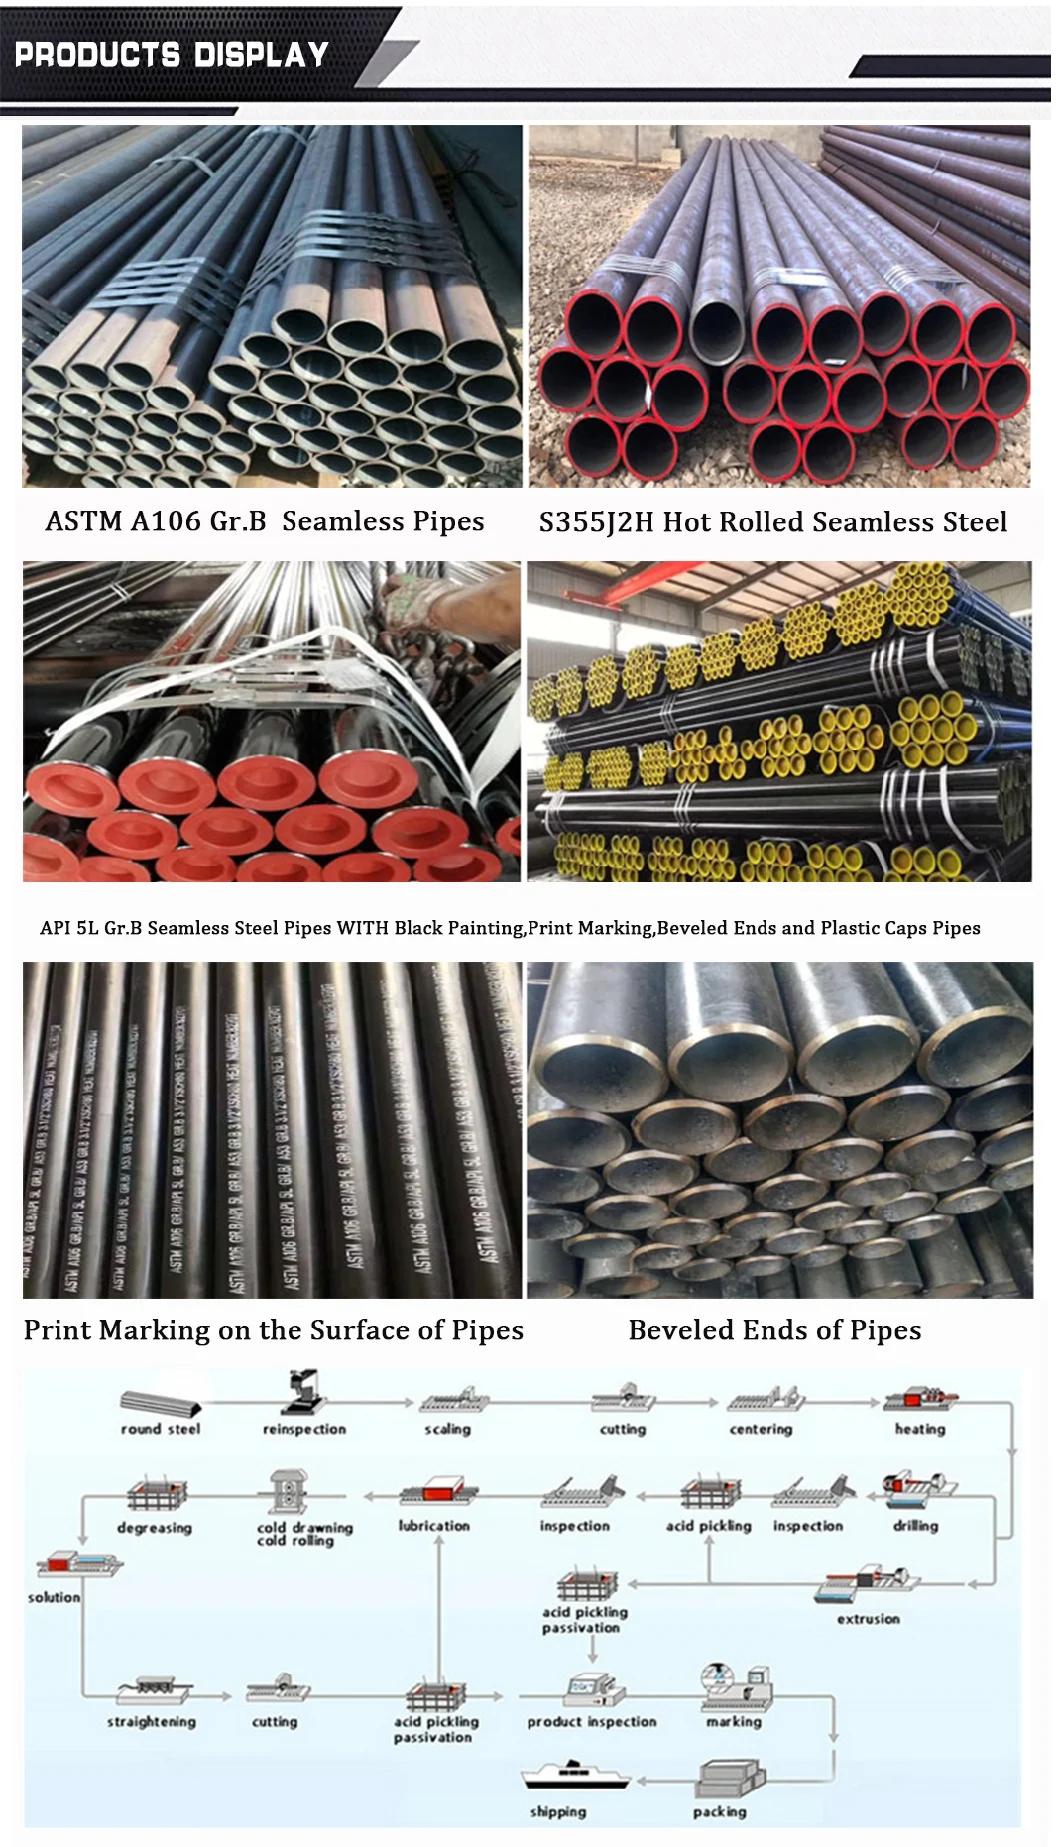 SAE 1010 SAE 1020 Q345b Hollow Section Steel Bar Cold Drawn Seamless Tube Steel Pipe Spiral Welded Carbon Steel Pipe